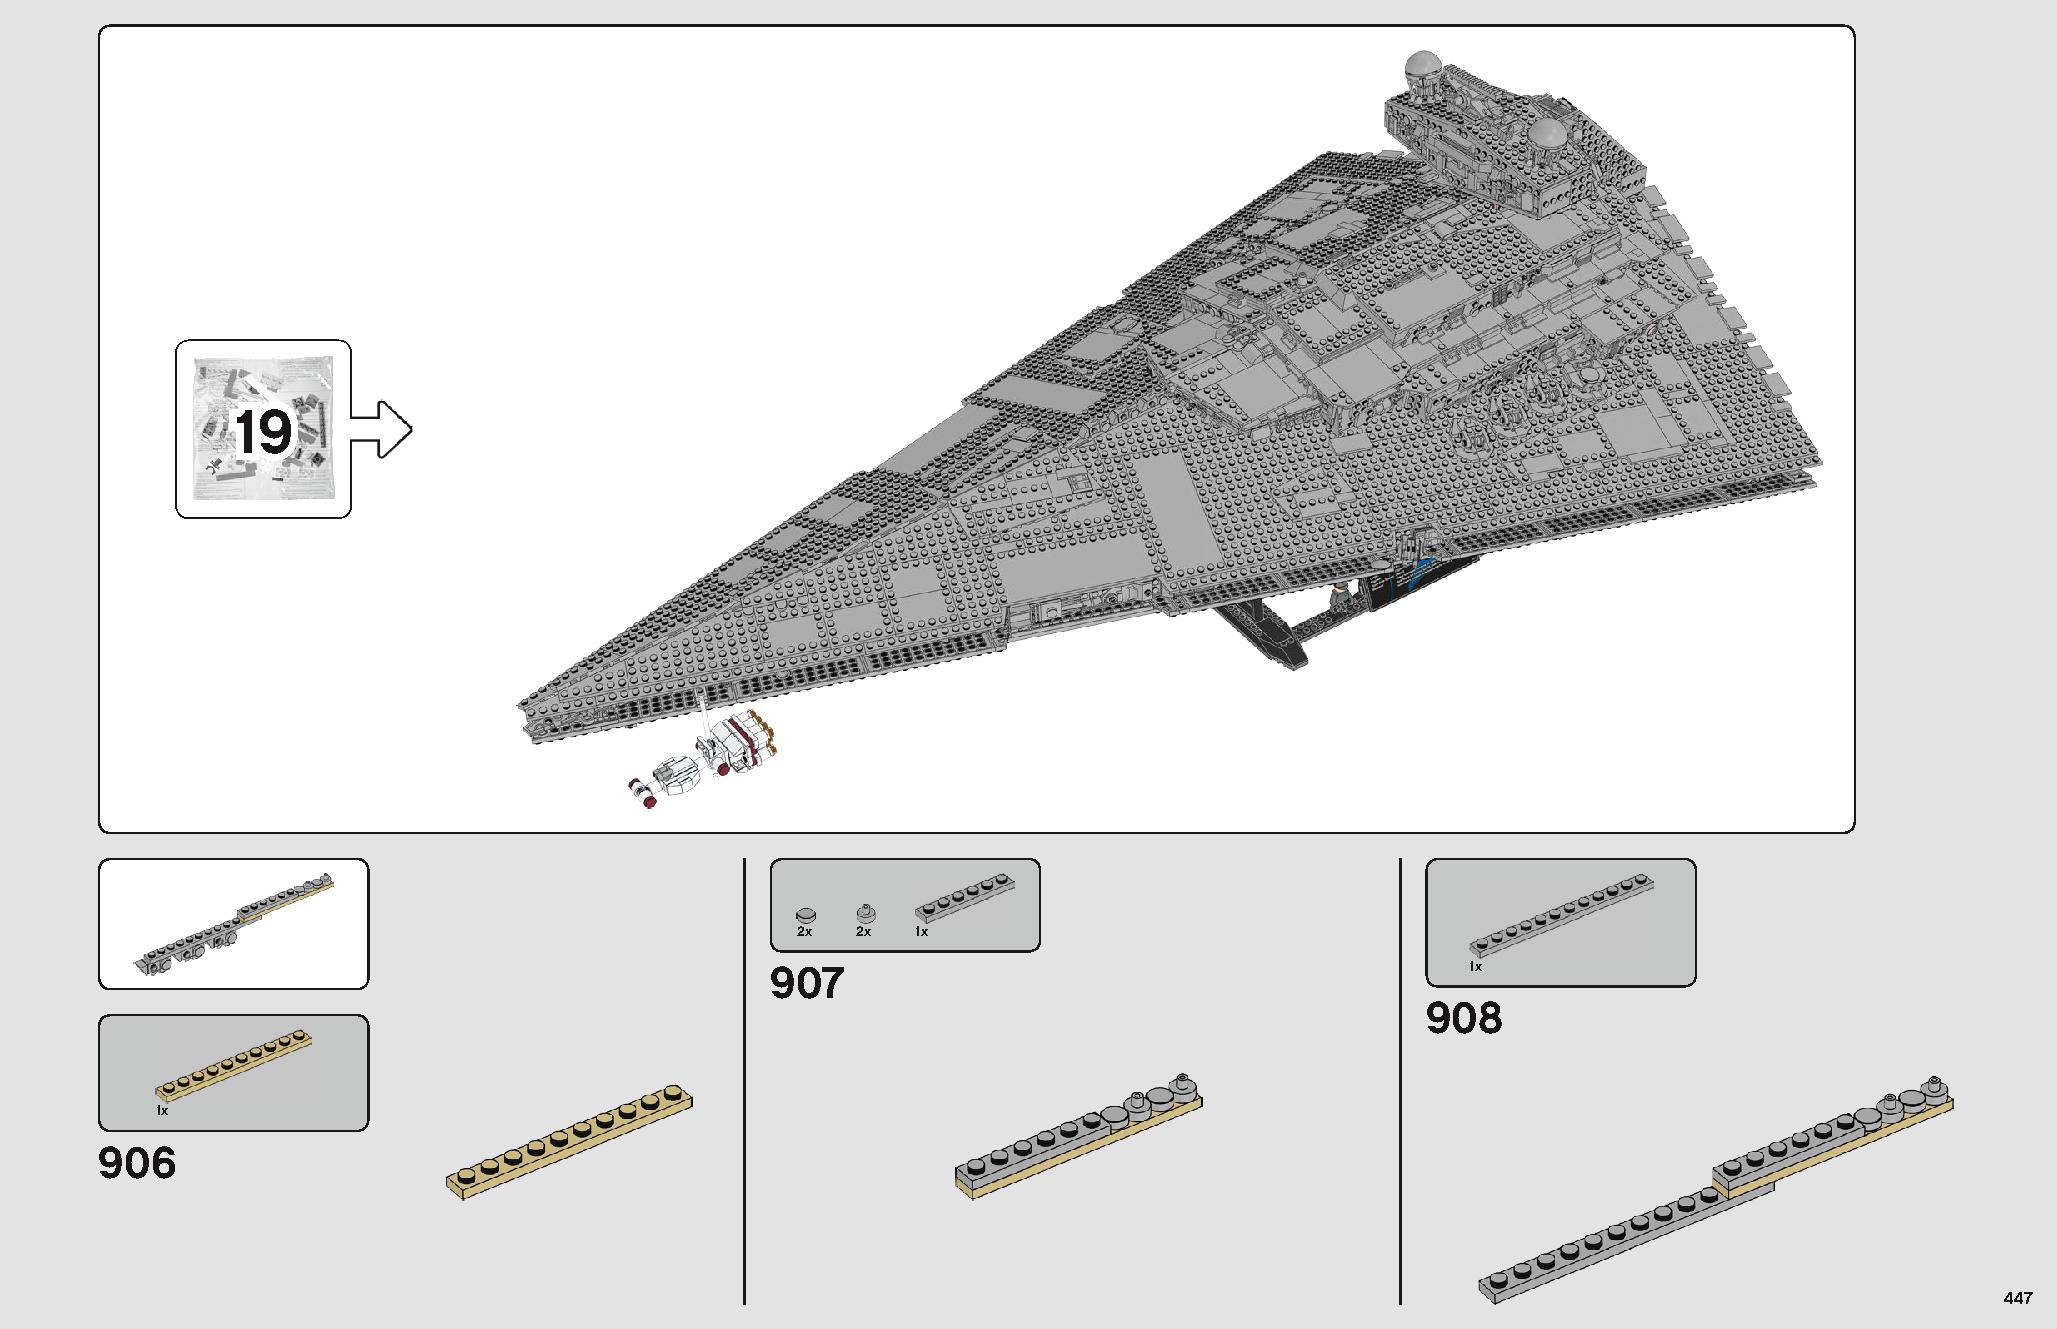 Imperial Star Destroyer 75252 レゴの商品情報 レゴの説明書・組立方法 447 page